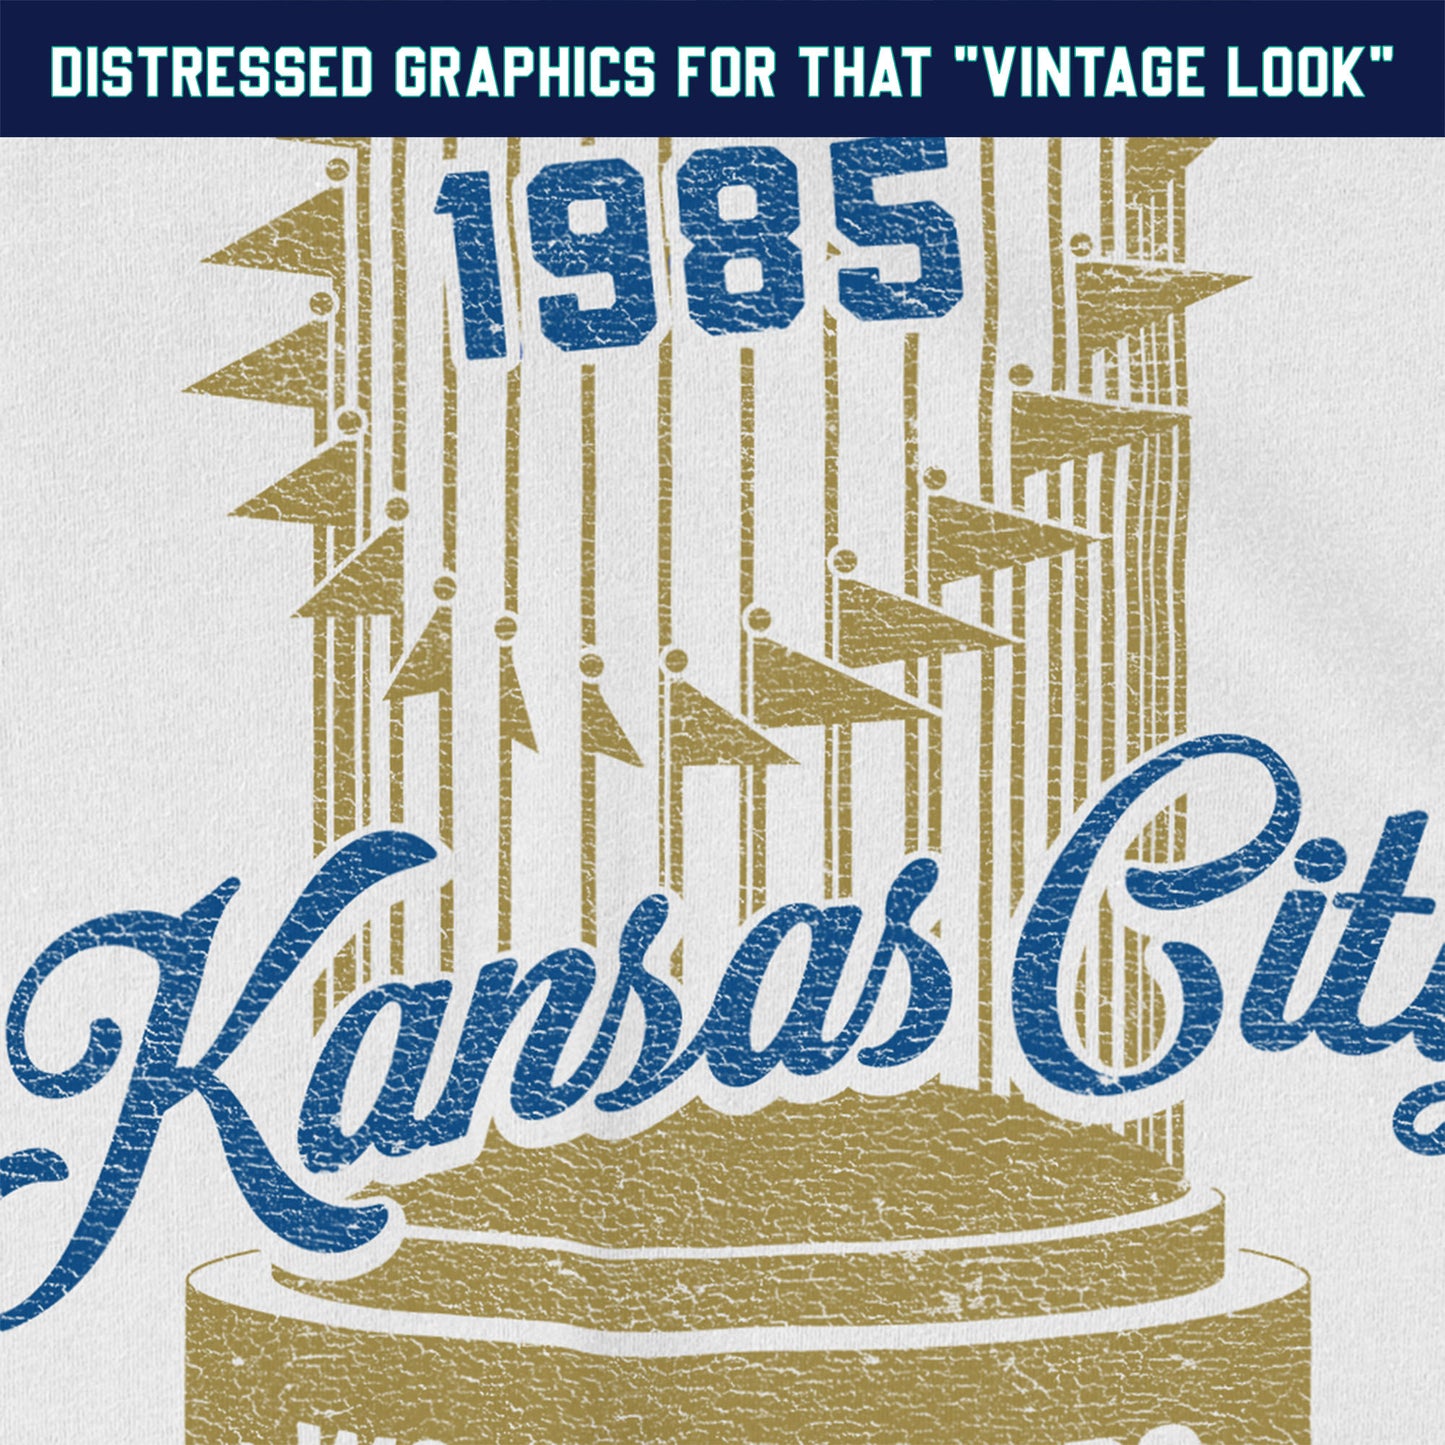 KC Swag Kansas City Royals blue KANSAS CITY 2015 1985 with gold WORLD SERIES TROPHY on white t-shirt cxloseup details of distressed graphics